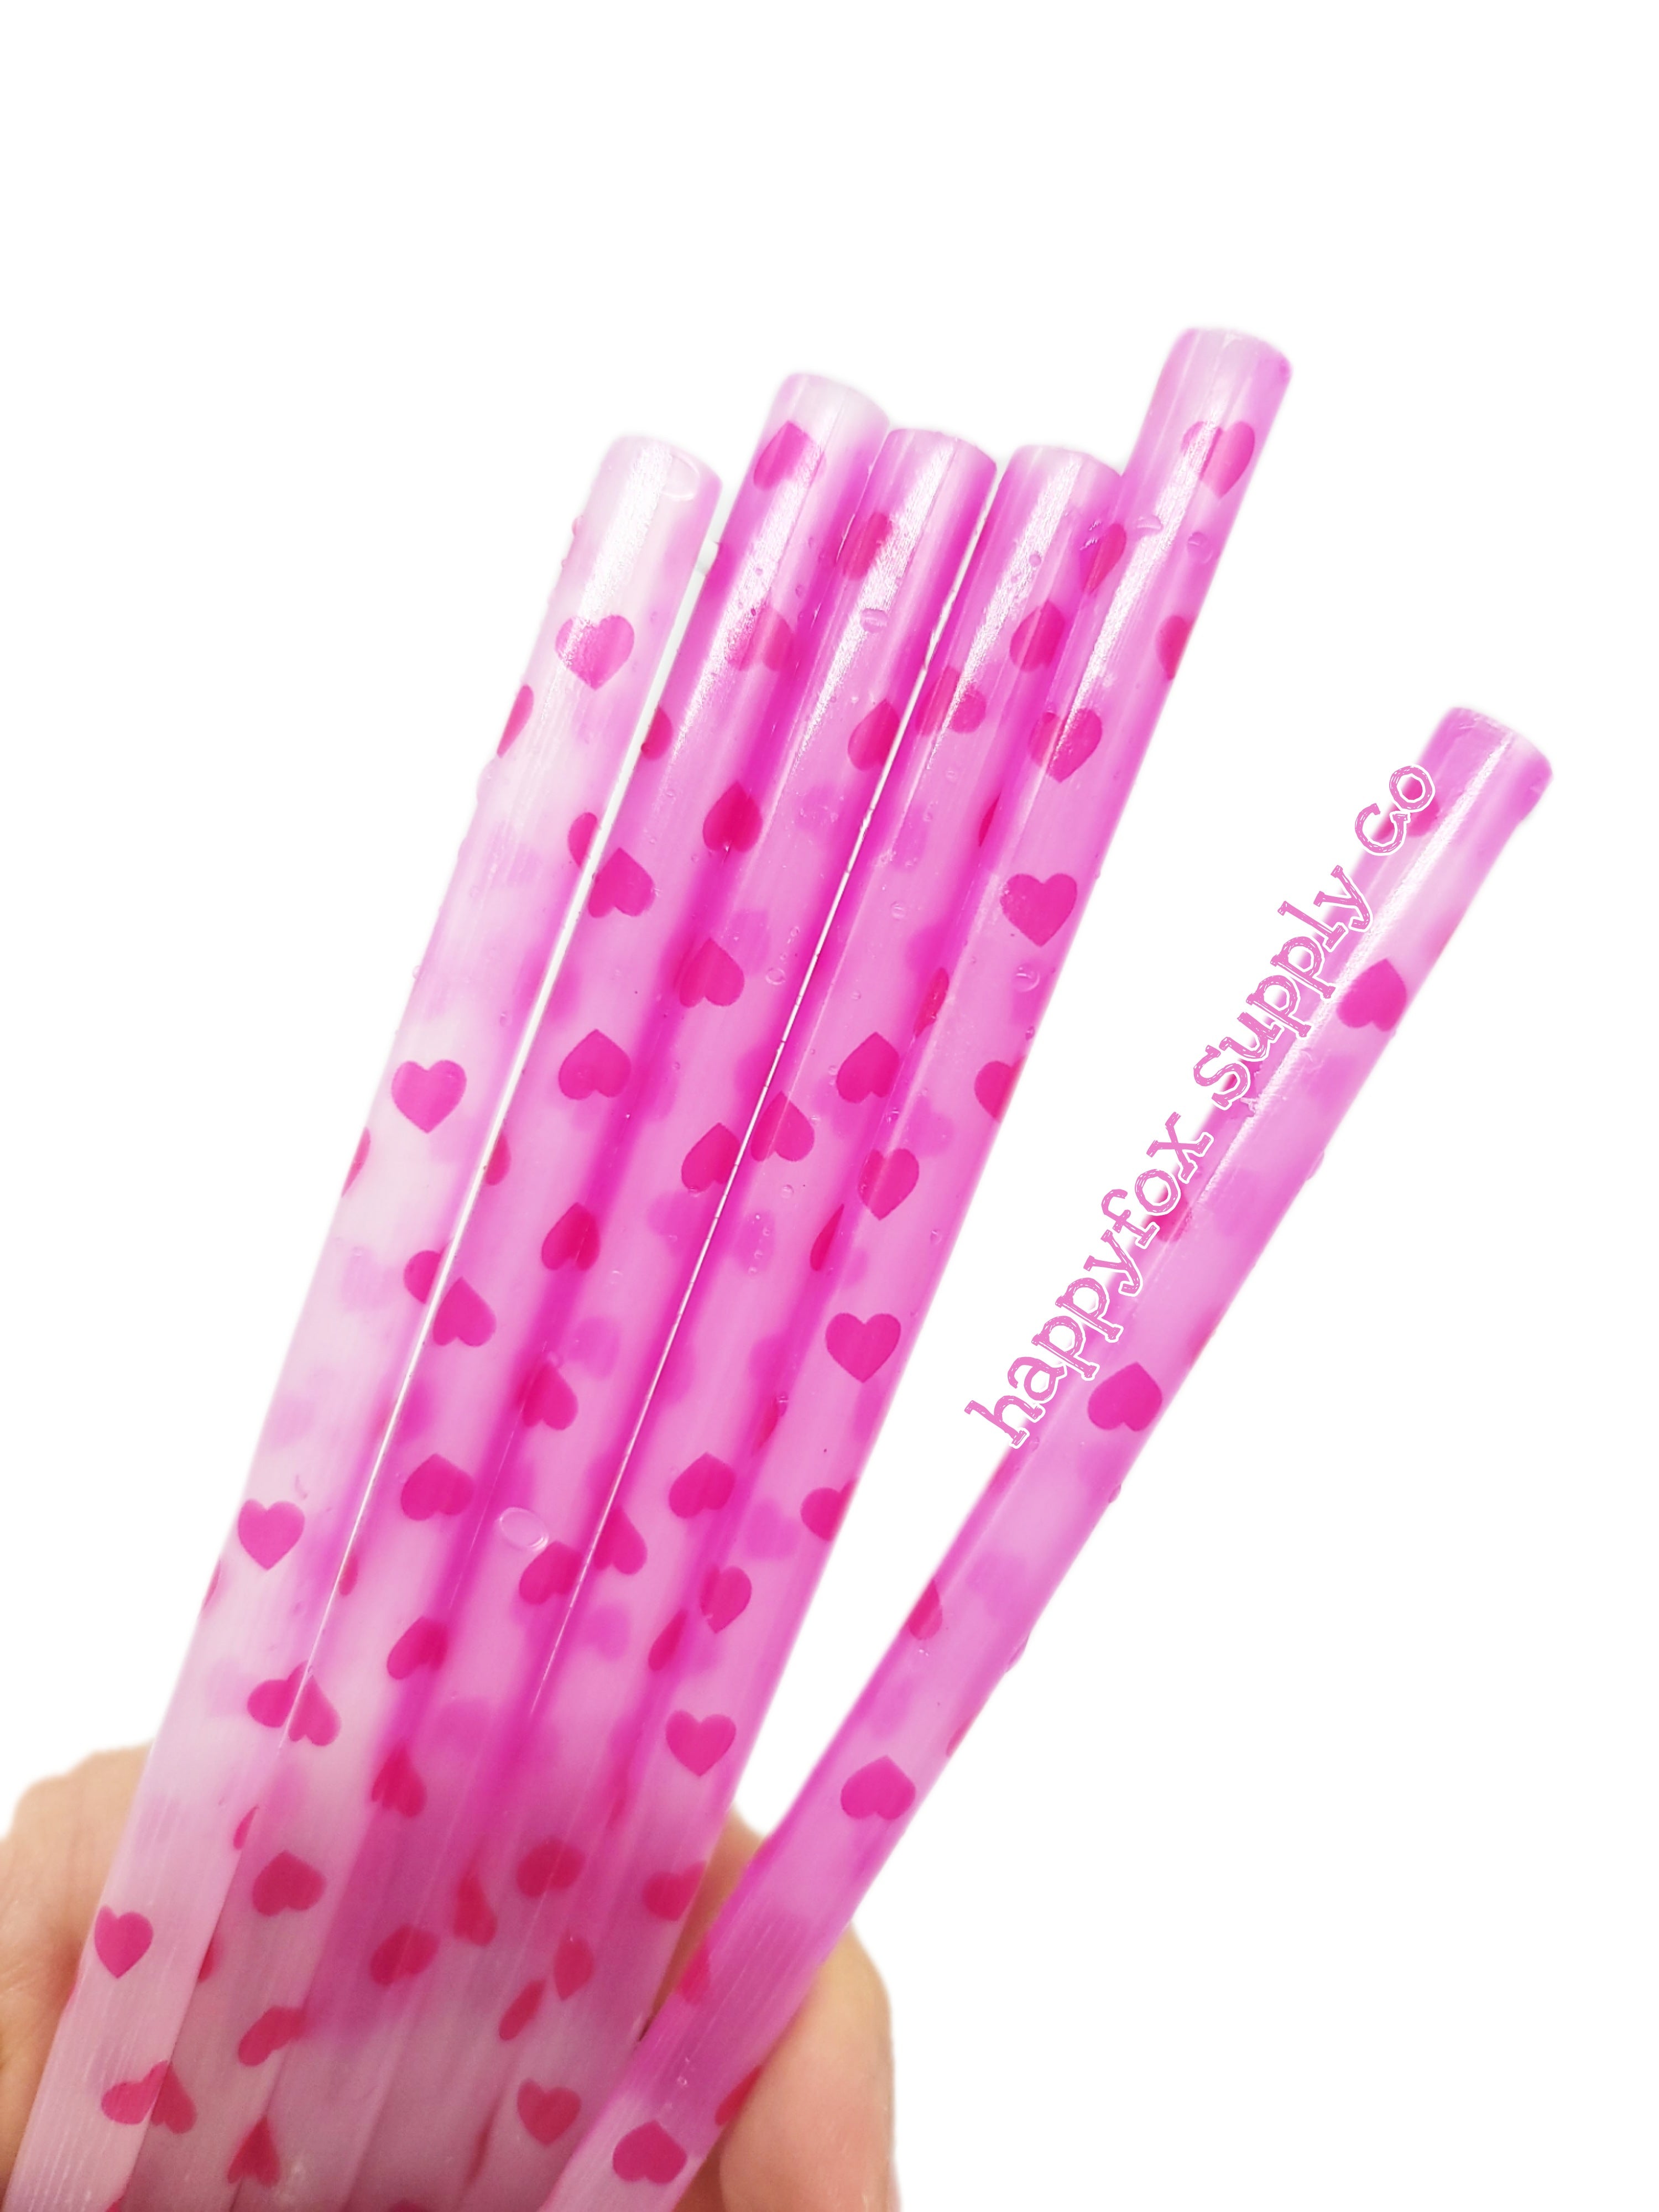 11 Reusable Straws Swirly Light Baby Pink Clear Plastic Acrylic